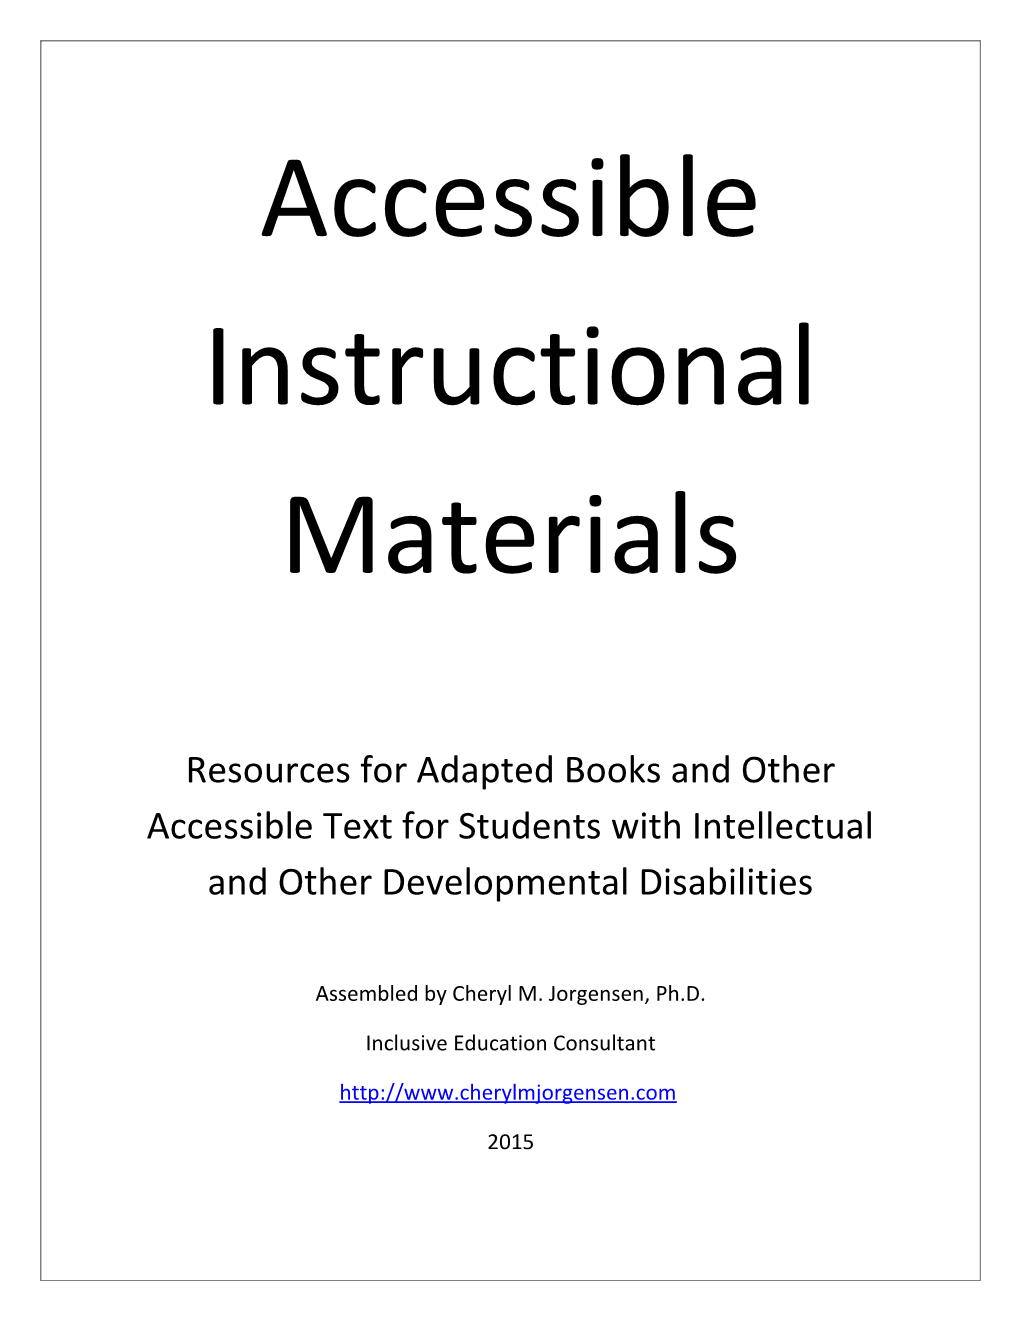 Accessible Instructional Materials